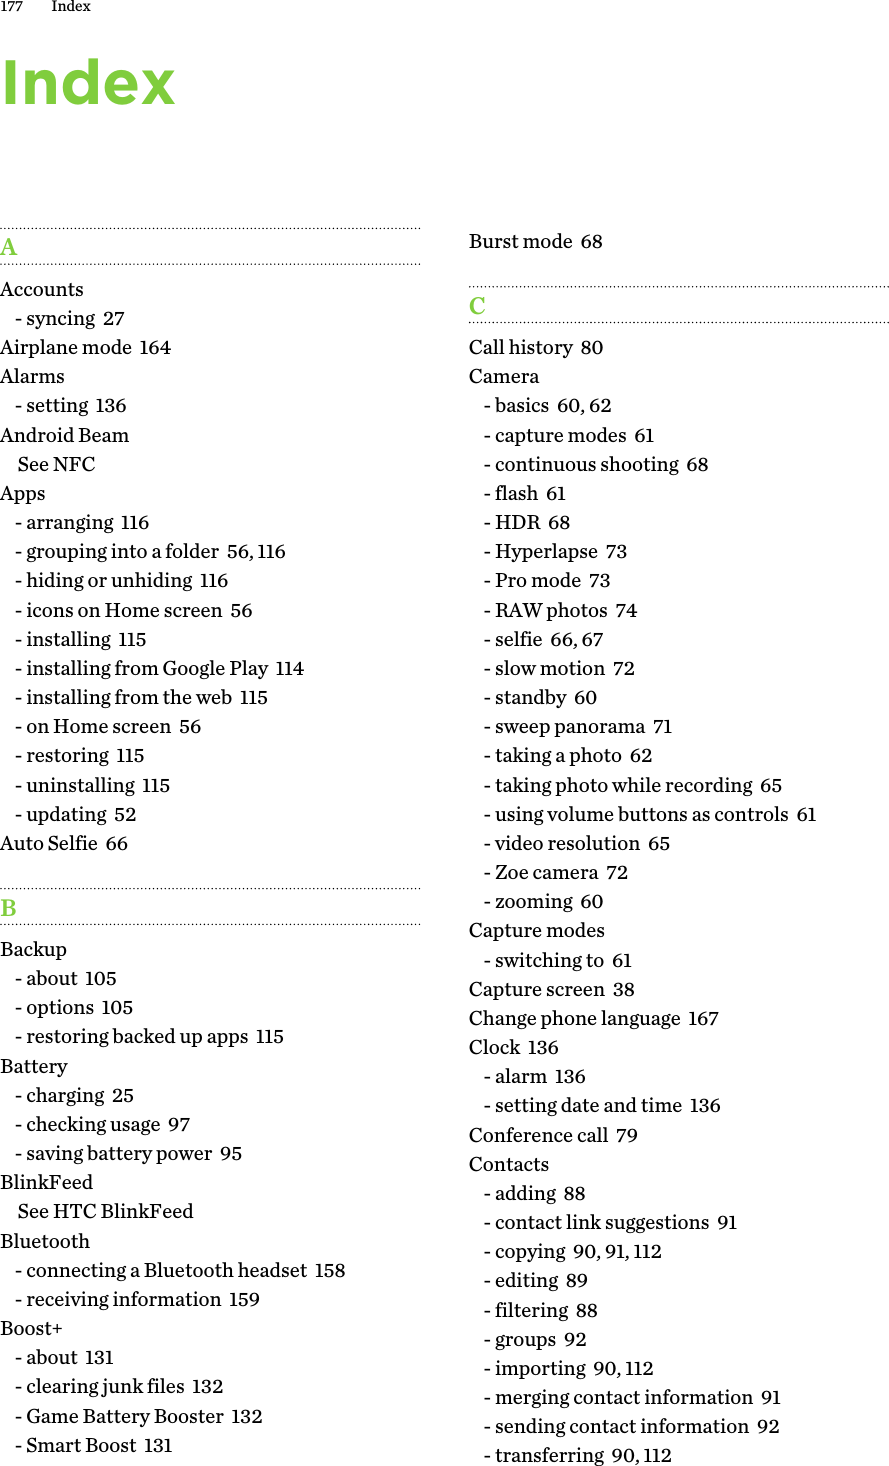 IndexAAccounts- syncing  27Airplane mode  164Alarms- setting  136Android BeamSee NFCApps- arranging  116- grouping into a folder  56, 116- hiding or unhiding  116- icons on Home screen  56- installing  115- installing from Google Play  114- installing from the web  115- on Home screen  56- restoring  115- uninstalling  115- updating  52Auto Selfie  66BBackup- about  105- options  105- restoring backed up apps  115Battery- charging  25- checking usage  97- saving battery power  95BlinkFeedSee HTC BlinkFeedBluetooth- connecting a Bluetooth headset  158- receiving information  159Boost+- about  131- clearing junk files  132- Game Battery Booster  132- Smart Boost  131Burst mode  68CCall history  80Camera- basics  60, 62- capture modes  61- continuous shooting  68- flash  61- HDR  68- Hyperlapse  73- Pro mode  73- RAW photos  74- selfie  66, 67- slow motion  72- standby  60- sweep panorama  71- taking a photo  62- taking photo while recording  65- using volume buttons as controls  61- video resolution  65- Zoe camera  72- zooming  60Capture modes- switching to  61Capture screen  38Change phone language  167Clock  136- alarm  136- setting date and time  136Conference call  79Contacts- adding  88- contact link suggestions  91- copying  90, 91, 112- editing  89- filtering  88- groups  92- importing  90, 112- merging contact information  91- sending contact information  92- transferring  90, 112177 Index